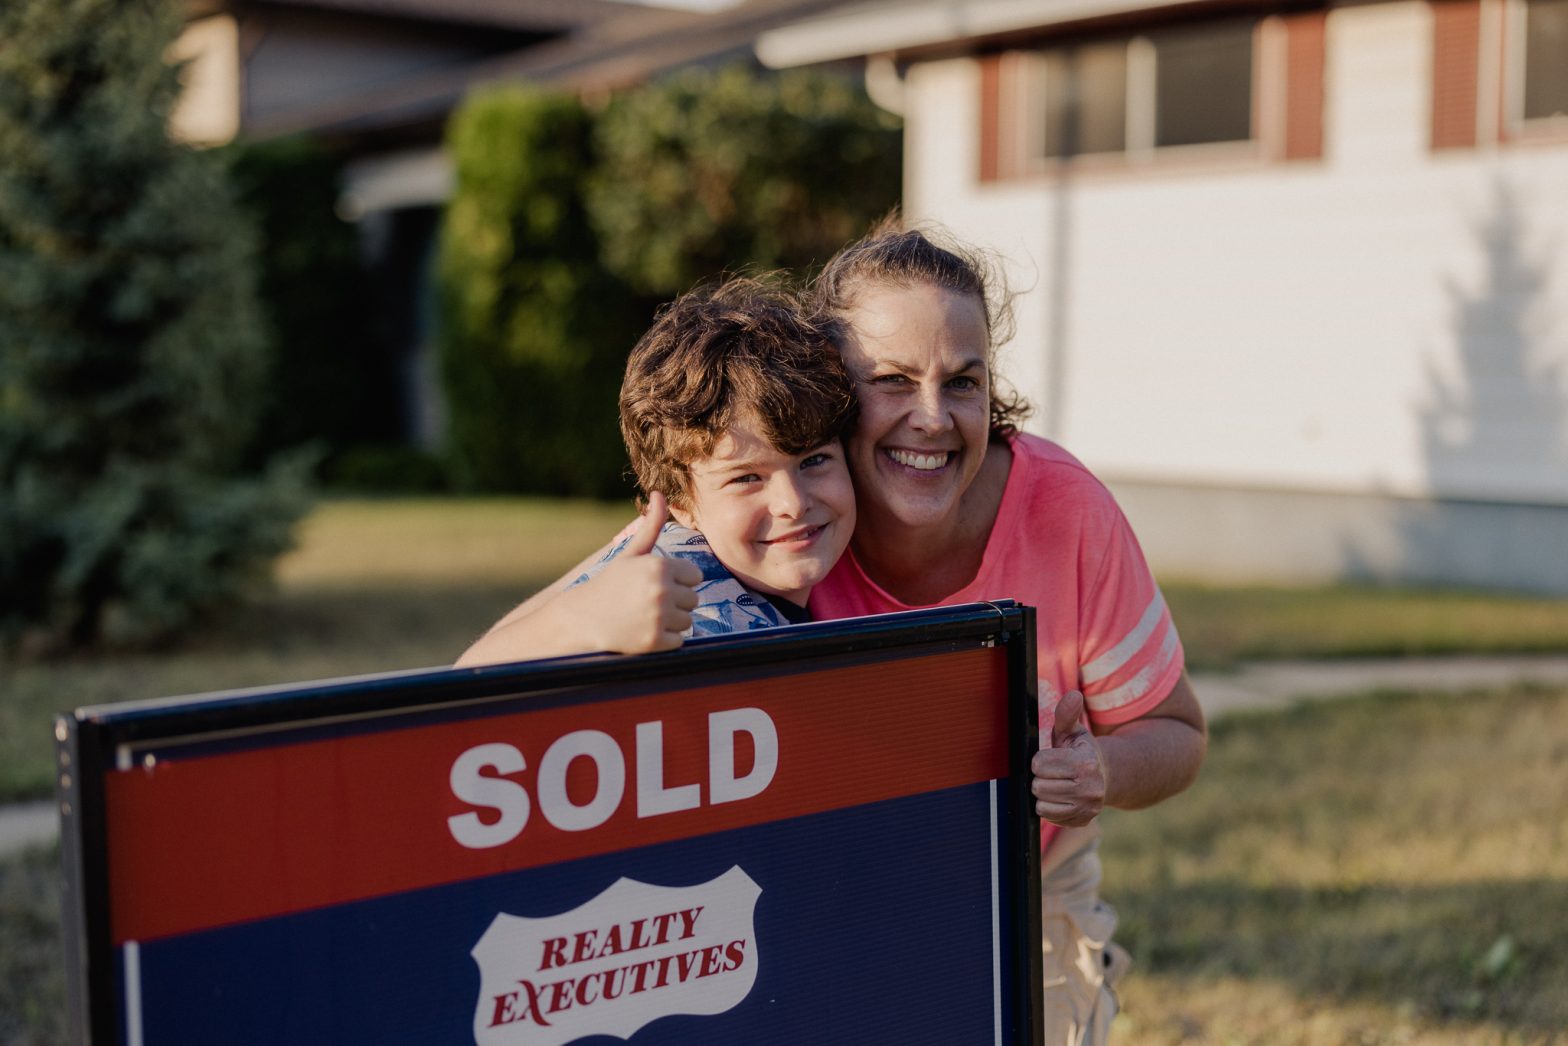 A joyful single mother and her young son standing proudly next to a 'Sold' sign, celebrating their victory of selling their home over the asking price in just four days.